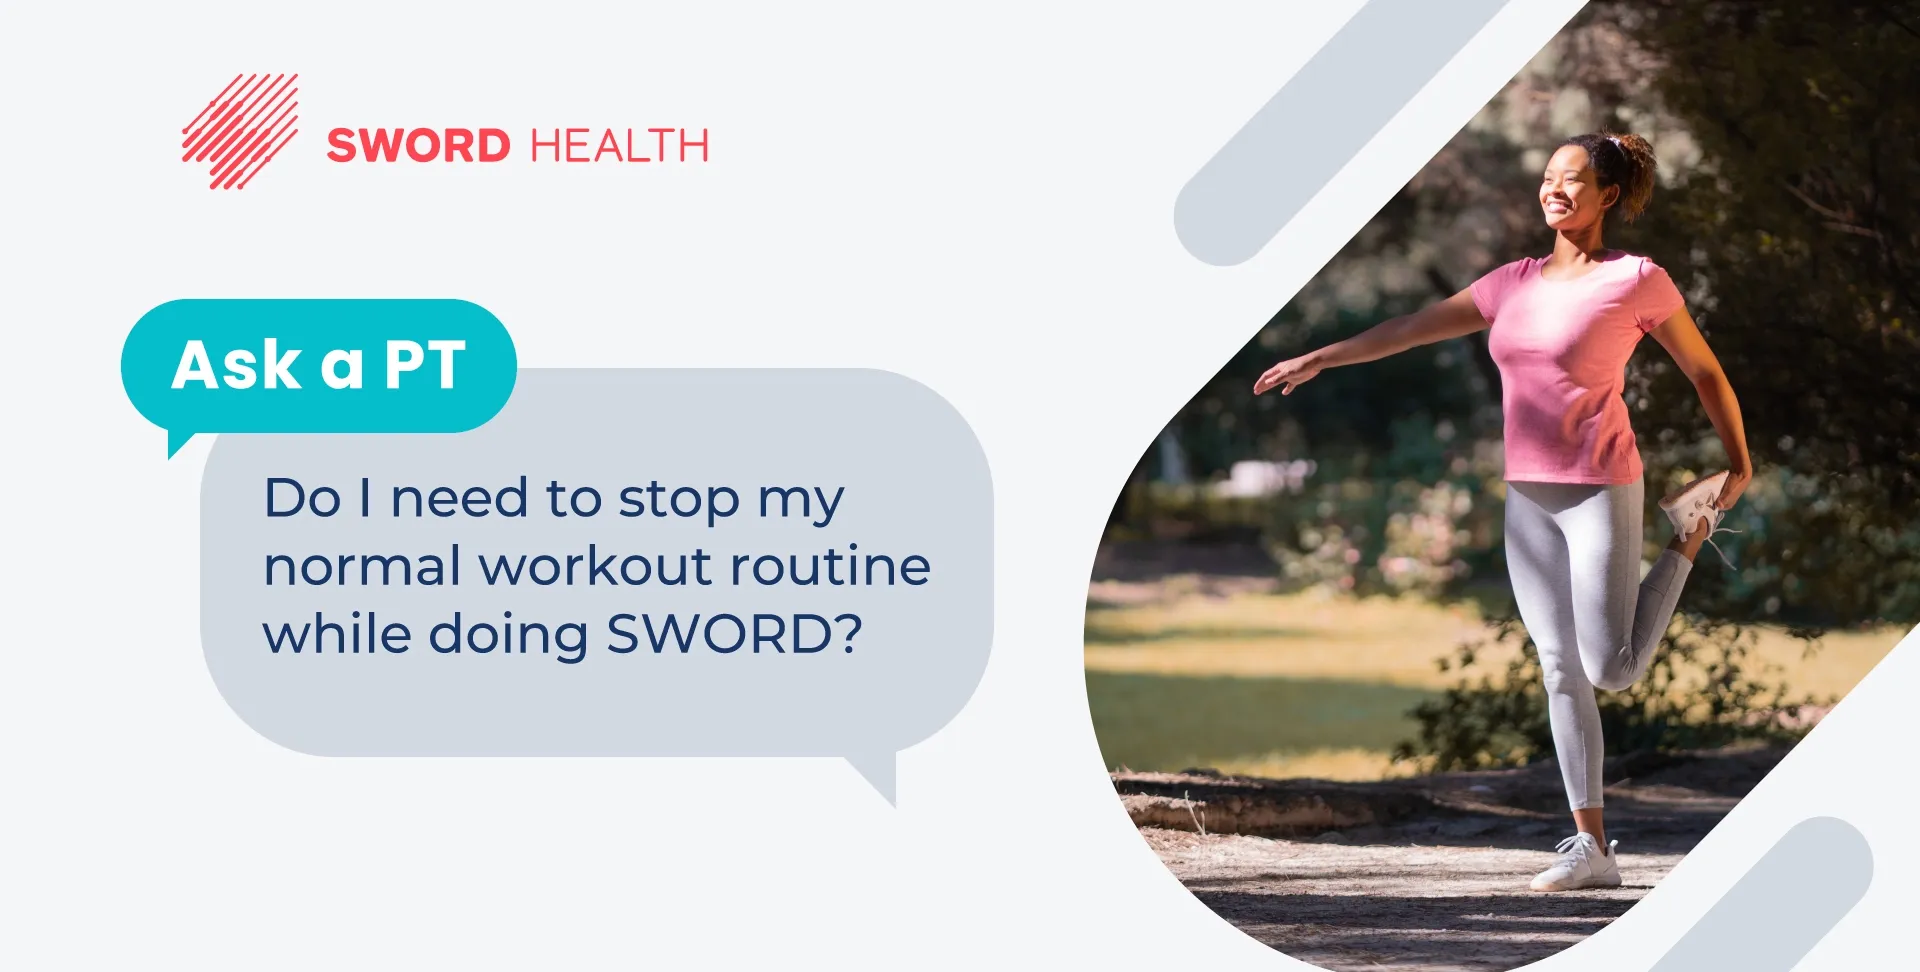 Do I need to stop my normal workout routine while doing a Sword Health program?